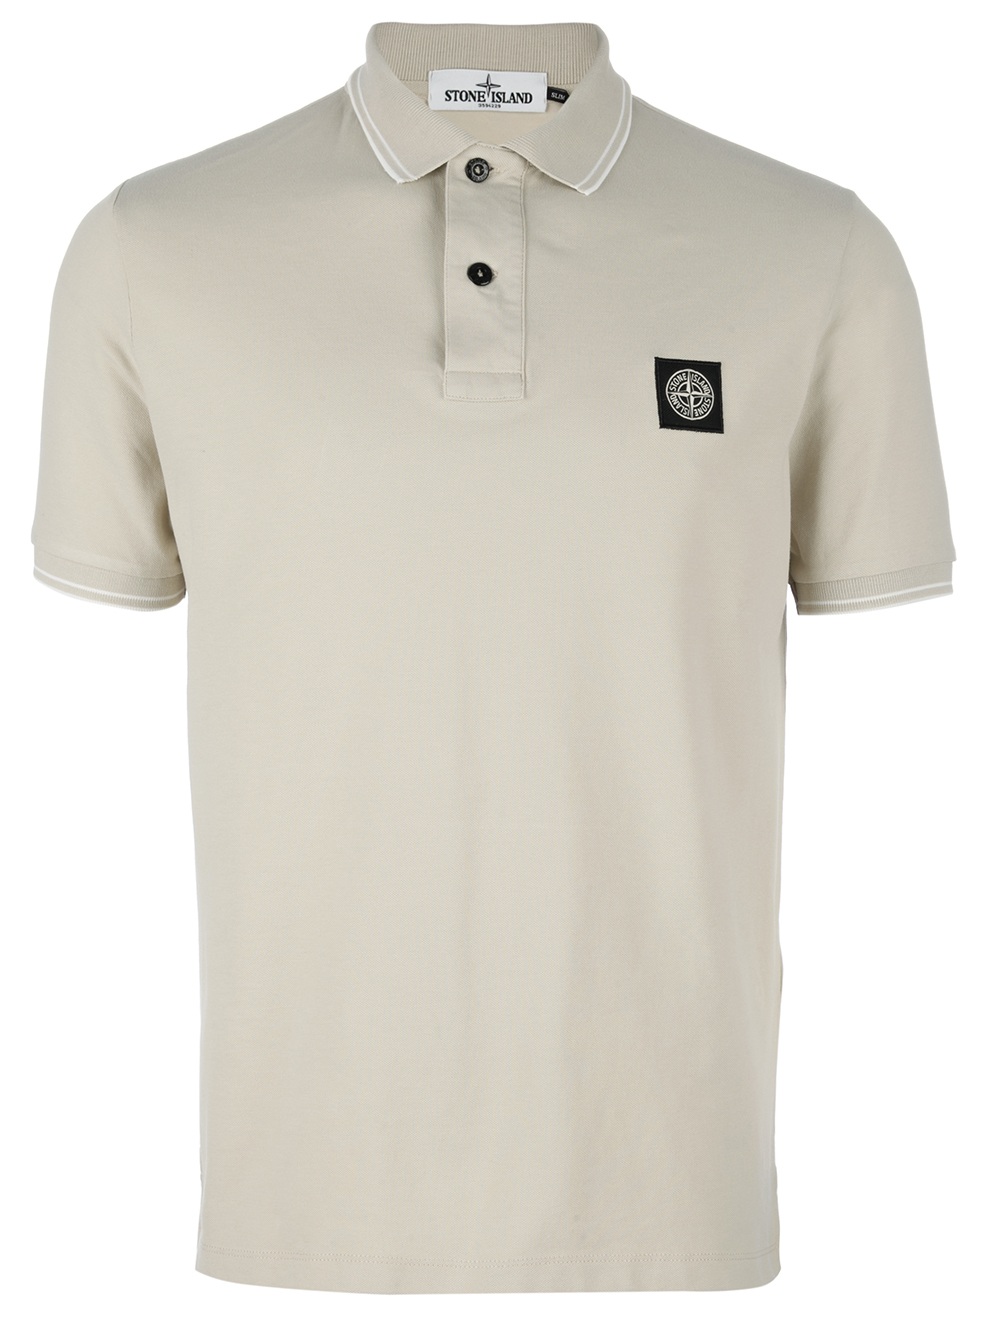 Stone Island Classic Polo Shirt in Natural for Men - Lyst